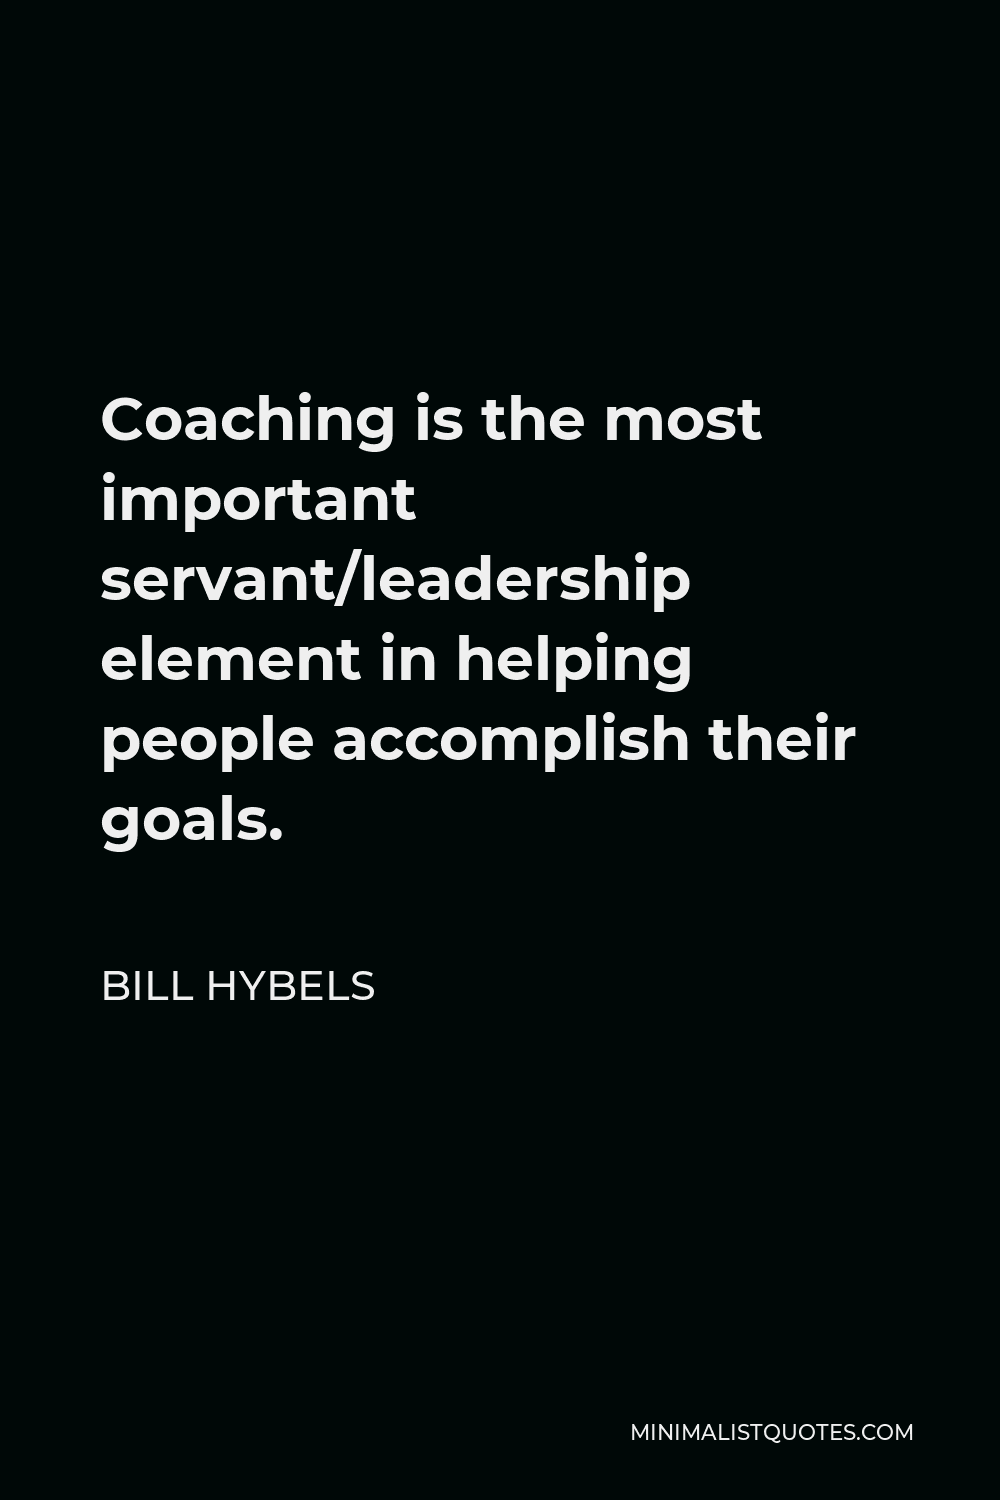 Bill Hybels Quote - Coaching is the most important servant/leadership element in helping people accomplish their goals.